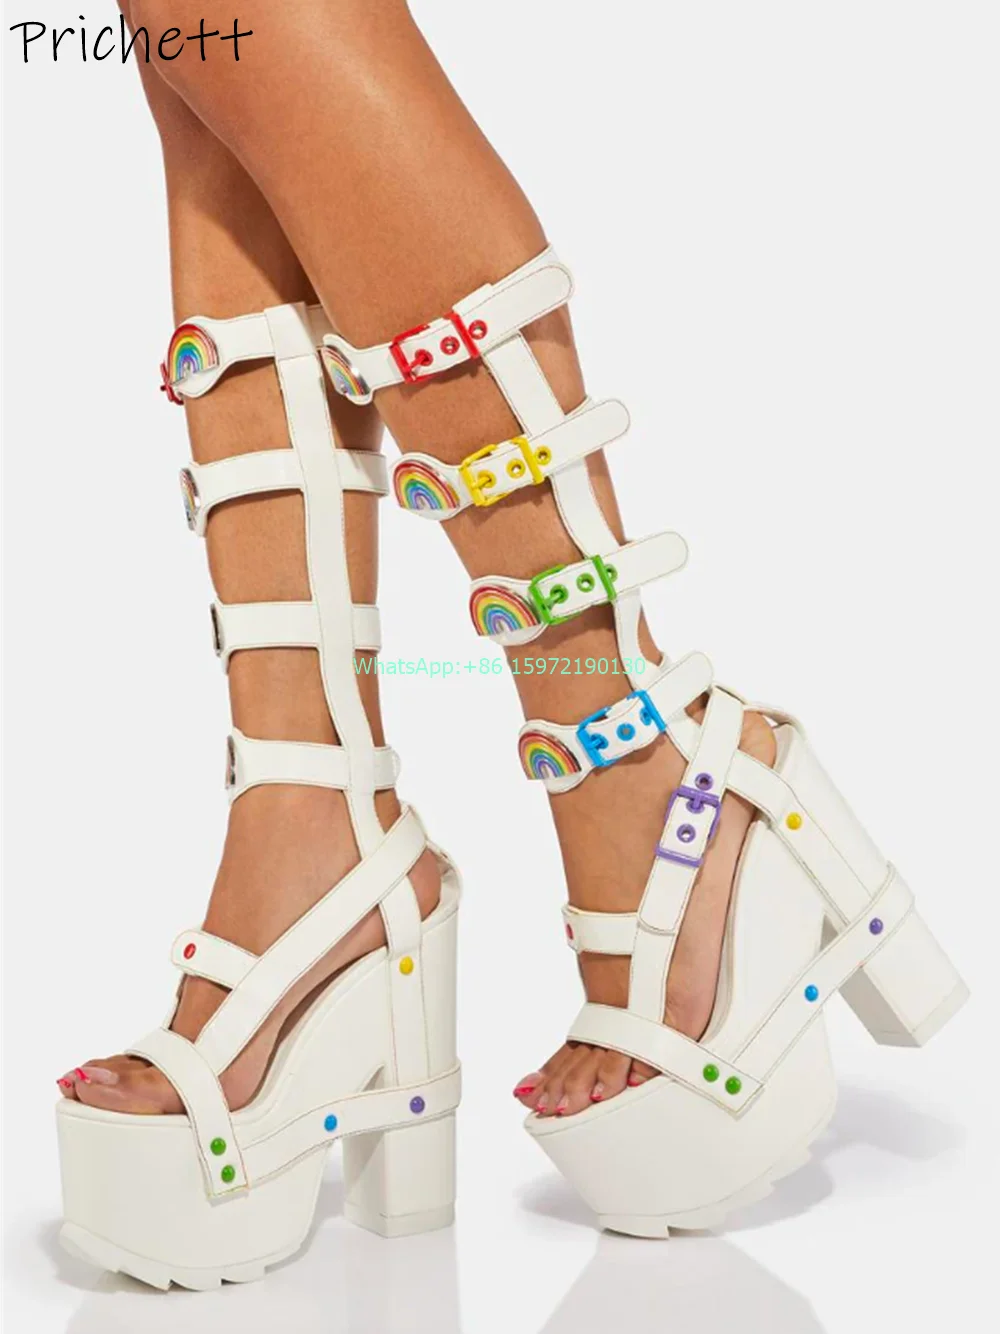 

Rainbow Hollow Sandals Colorful Round Toe Buckle Strap Platform Chunky Heels Shoes White Fashion Runway Sexy Knee High Boots